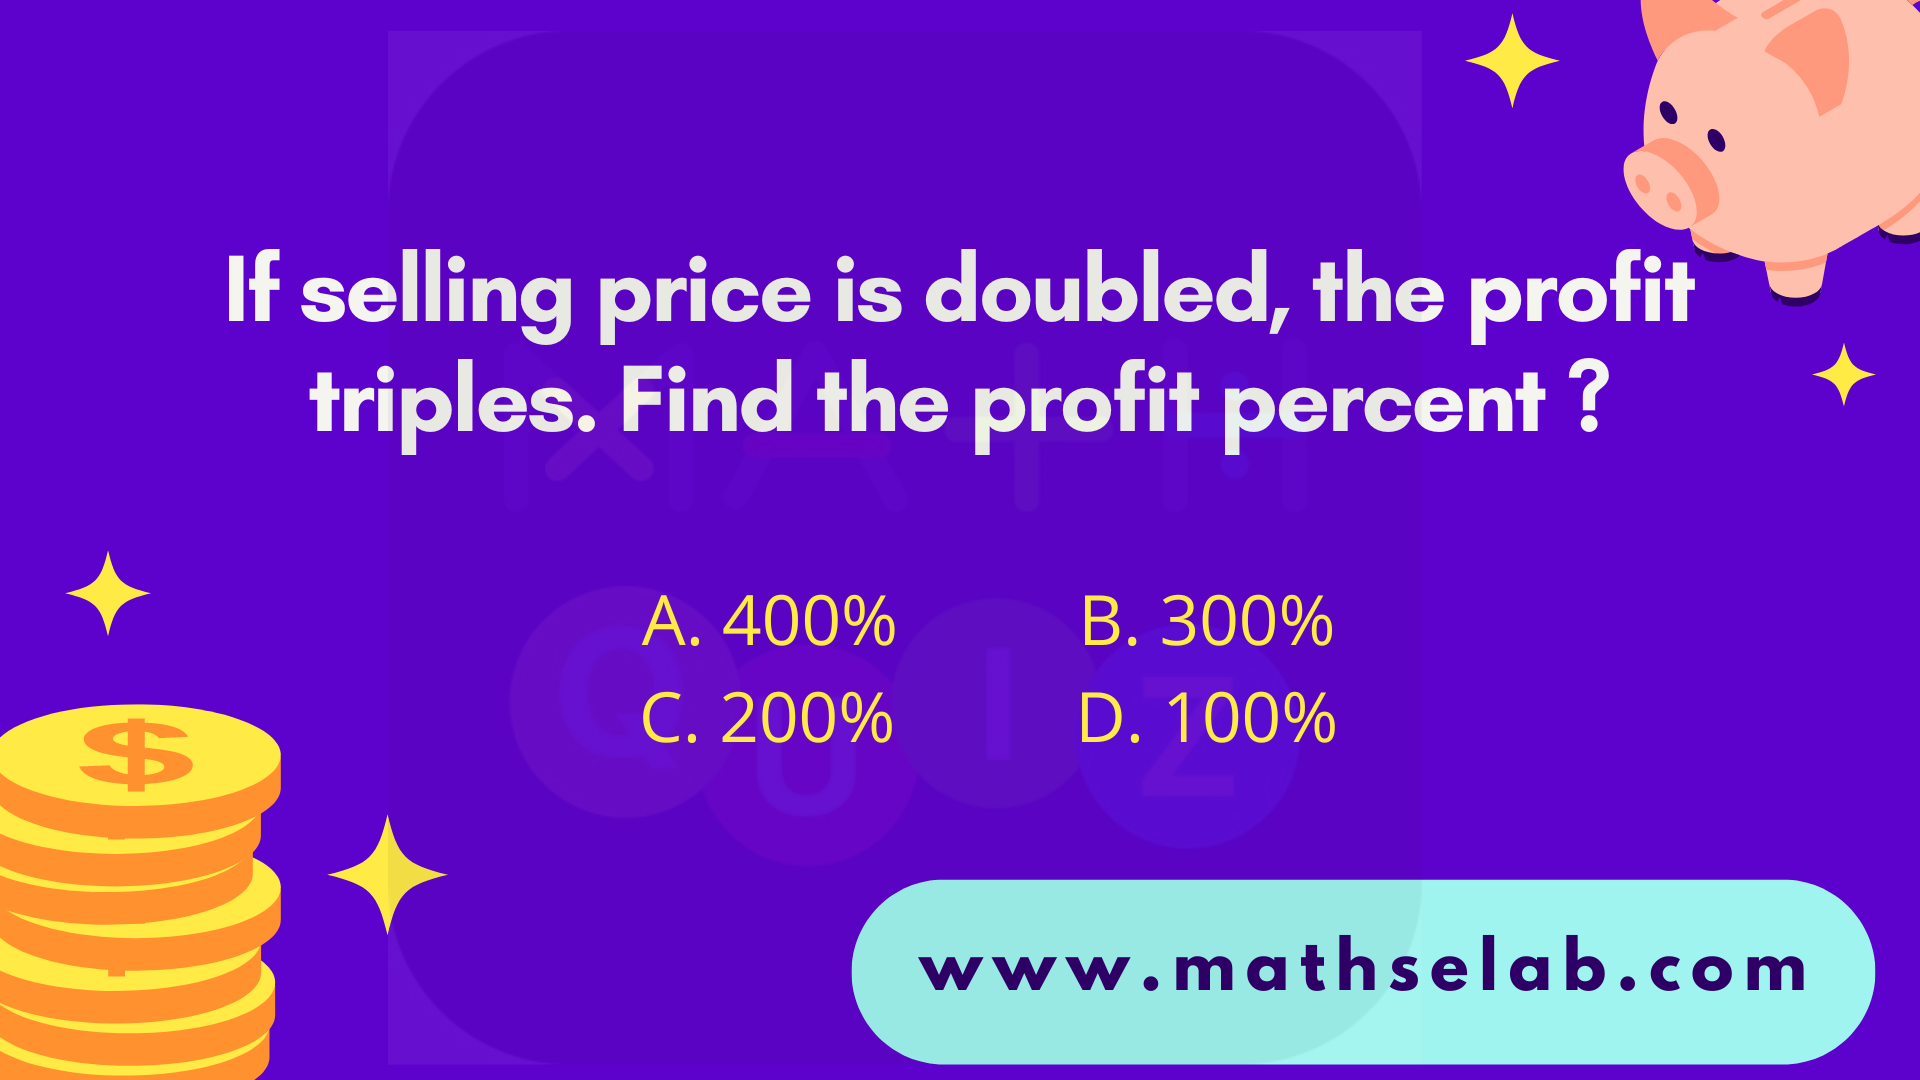 If selling price is doubled, the profit triples. Find the profit percent - www.mathselab.com (1)